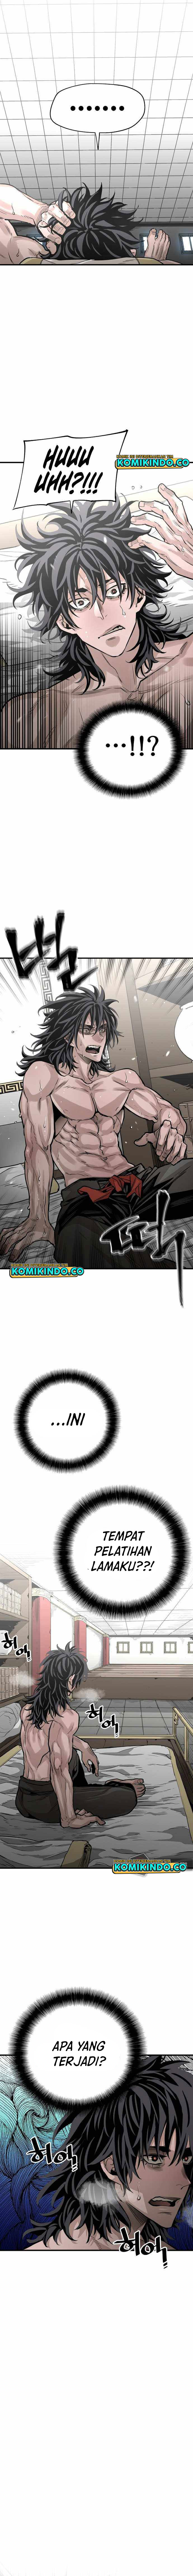 Heavenly Demon Cultivation Simulation Chapter 1 fix